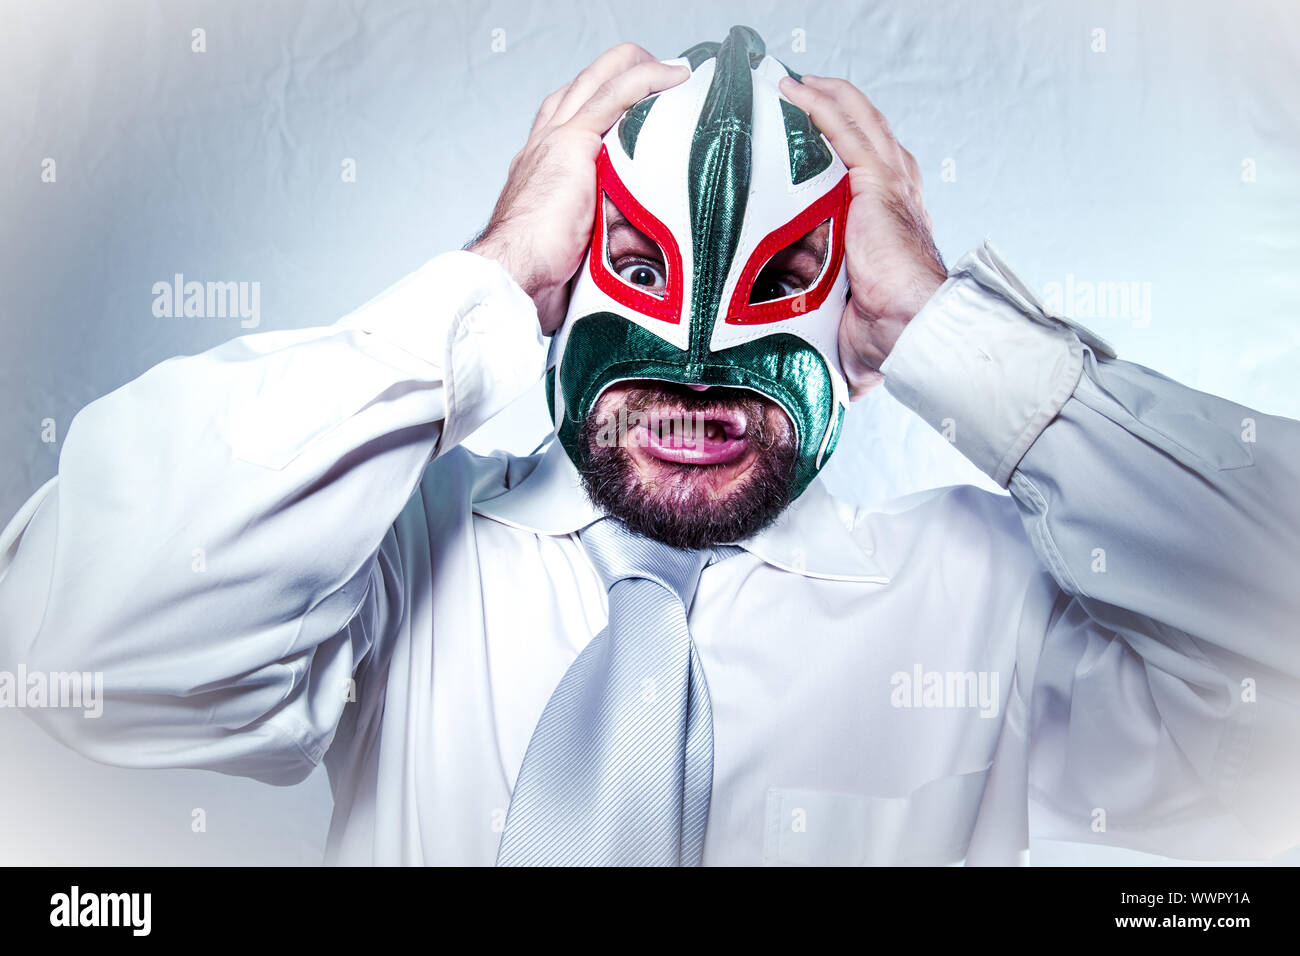 Manager, angry businessman with Mexican wrestler mask, expressions of anger and rage Stock Photo